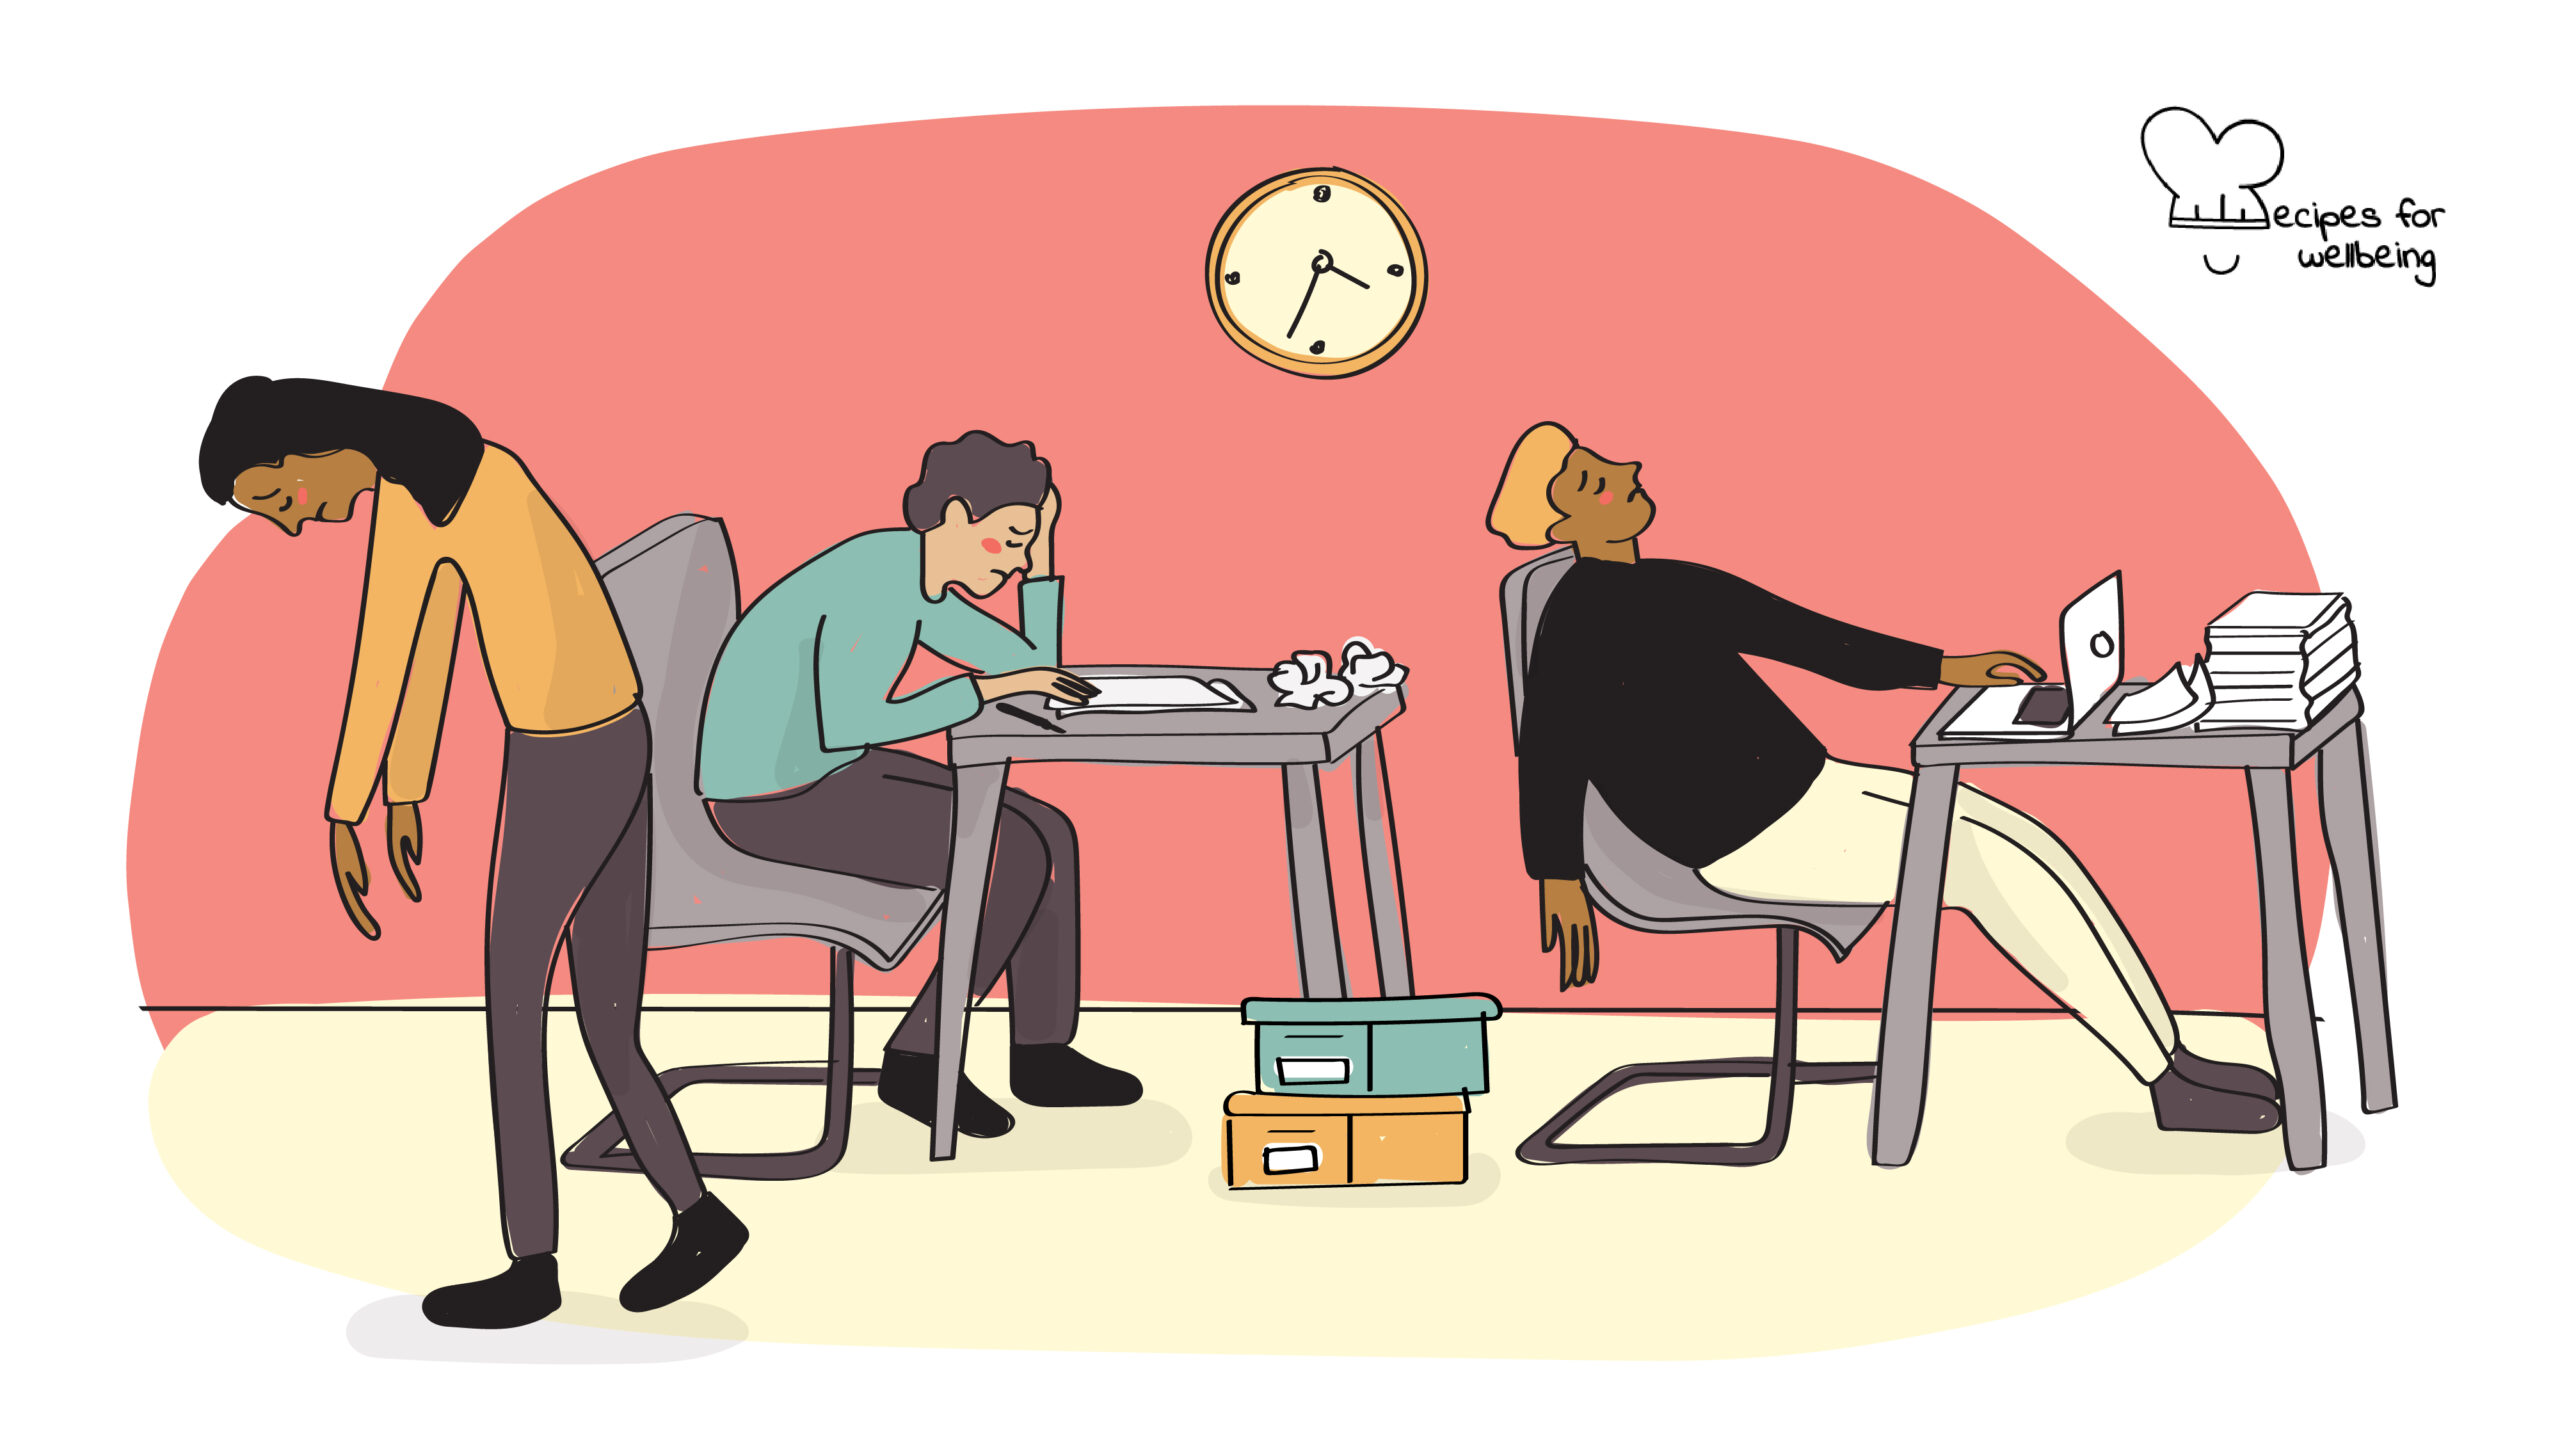 Illustration of three people in a work setting who look exhausted. © Recipes for Wellbeing